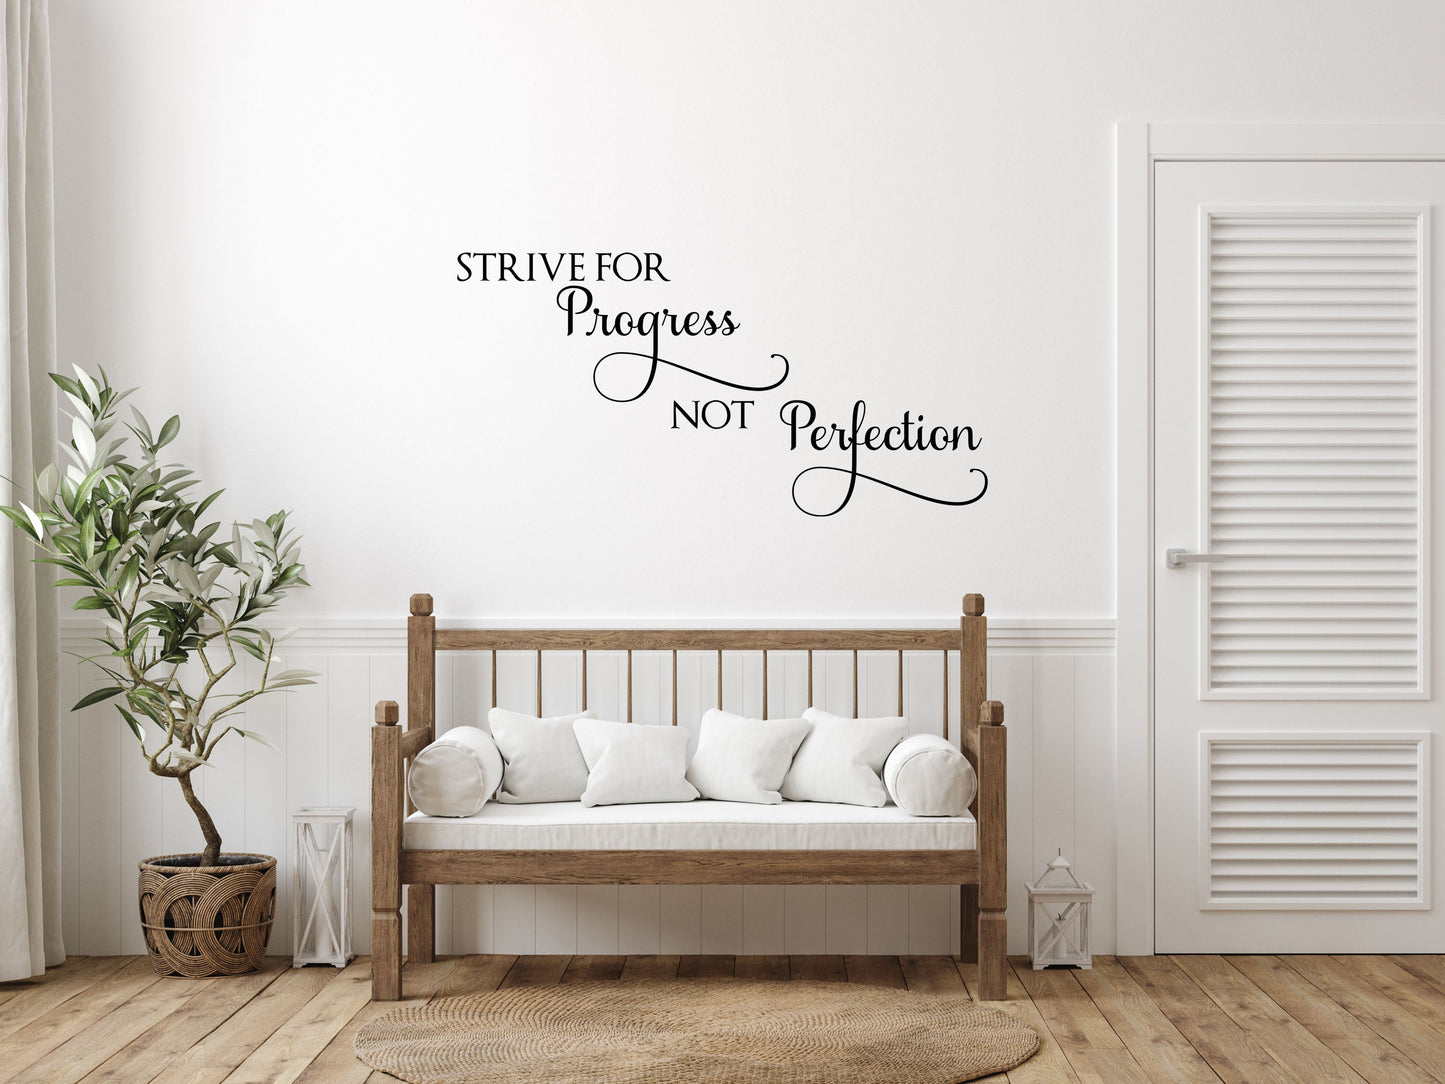 Strive For Progress Not Perfection Wall Quote Sticker - Inspirational Wall Decals Vinyl Wall Decal Inspirational Wall Signs 